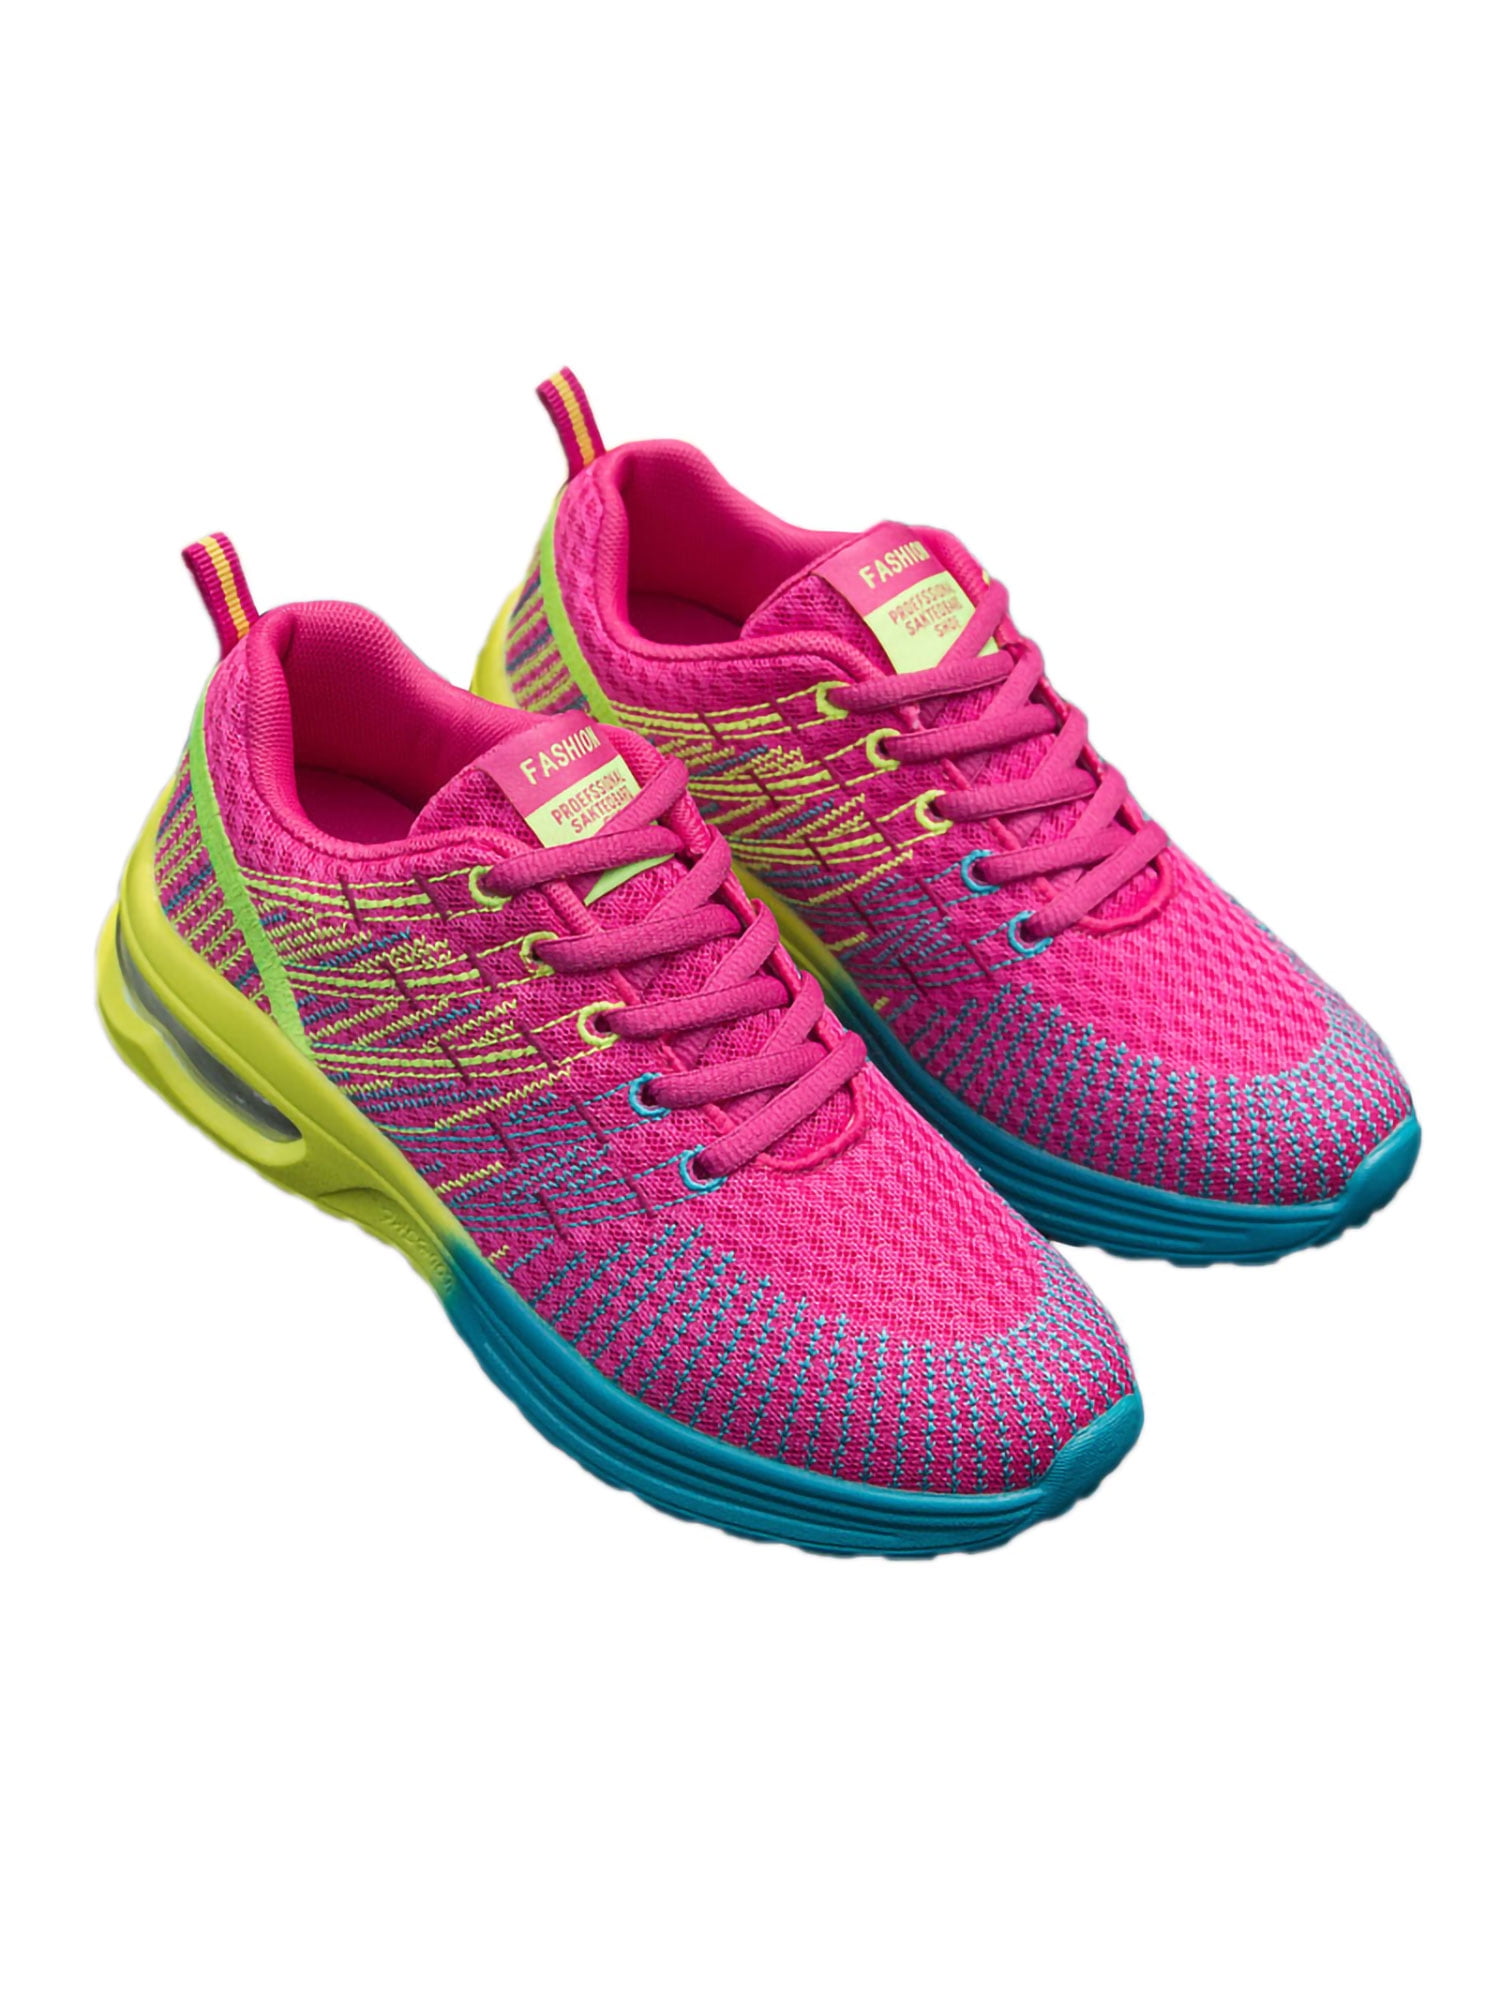 Women's Running Sneakers Breathable Walking Athletic Sports Tennis Shoes Gym